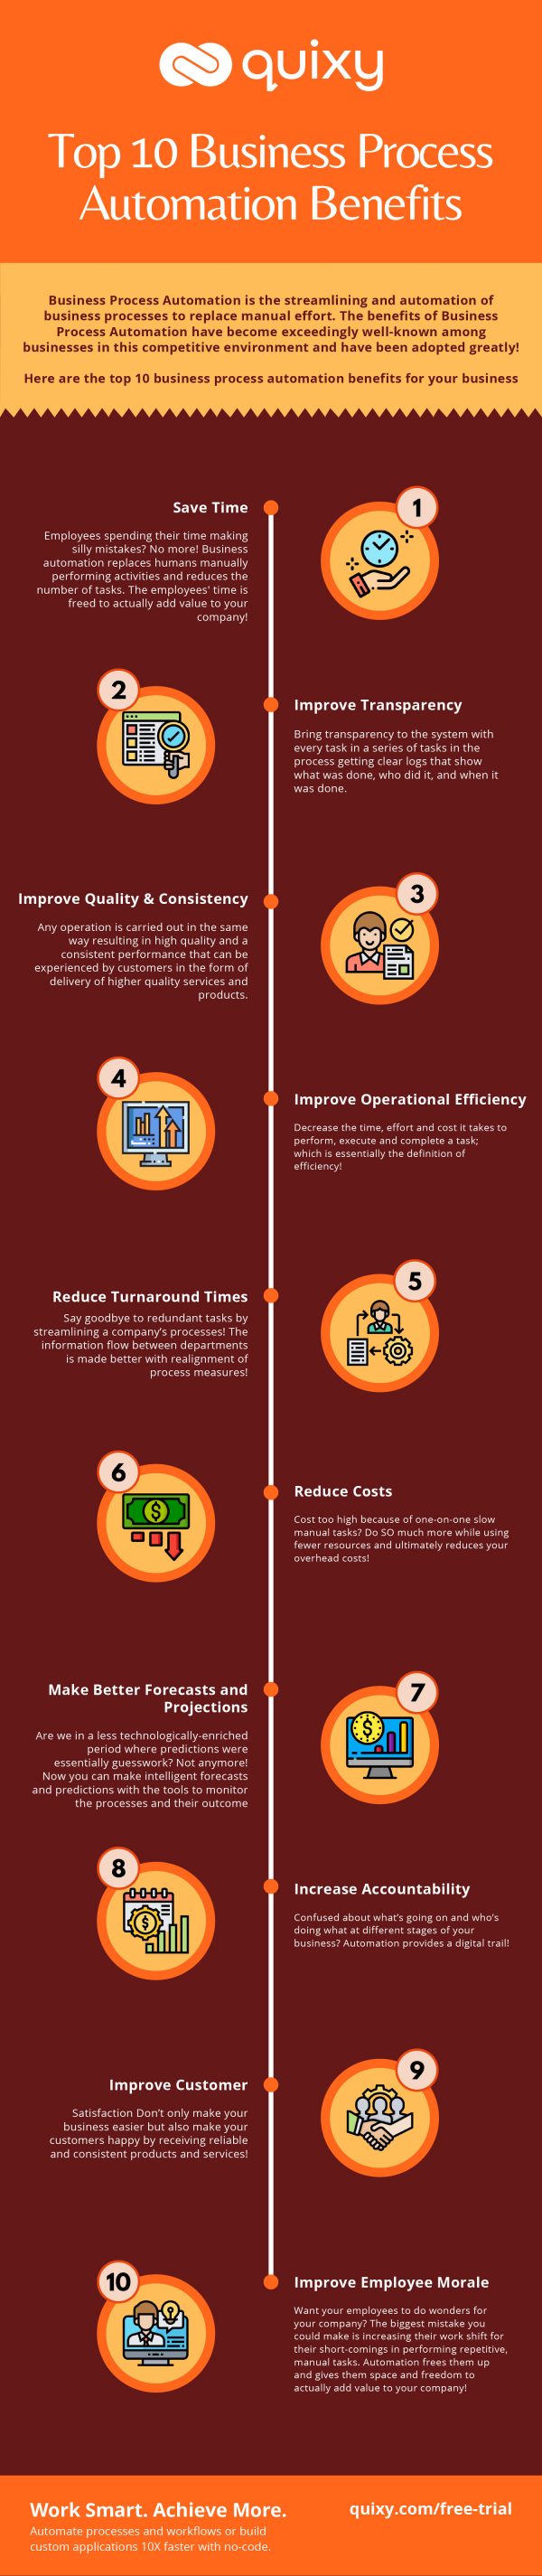 Infographic Top 10 Business Process Automation Benefits Quixy 4915